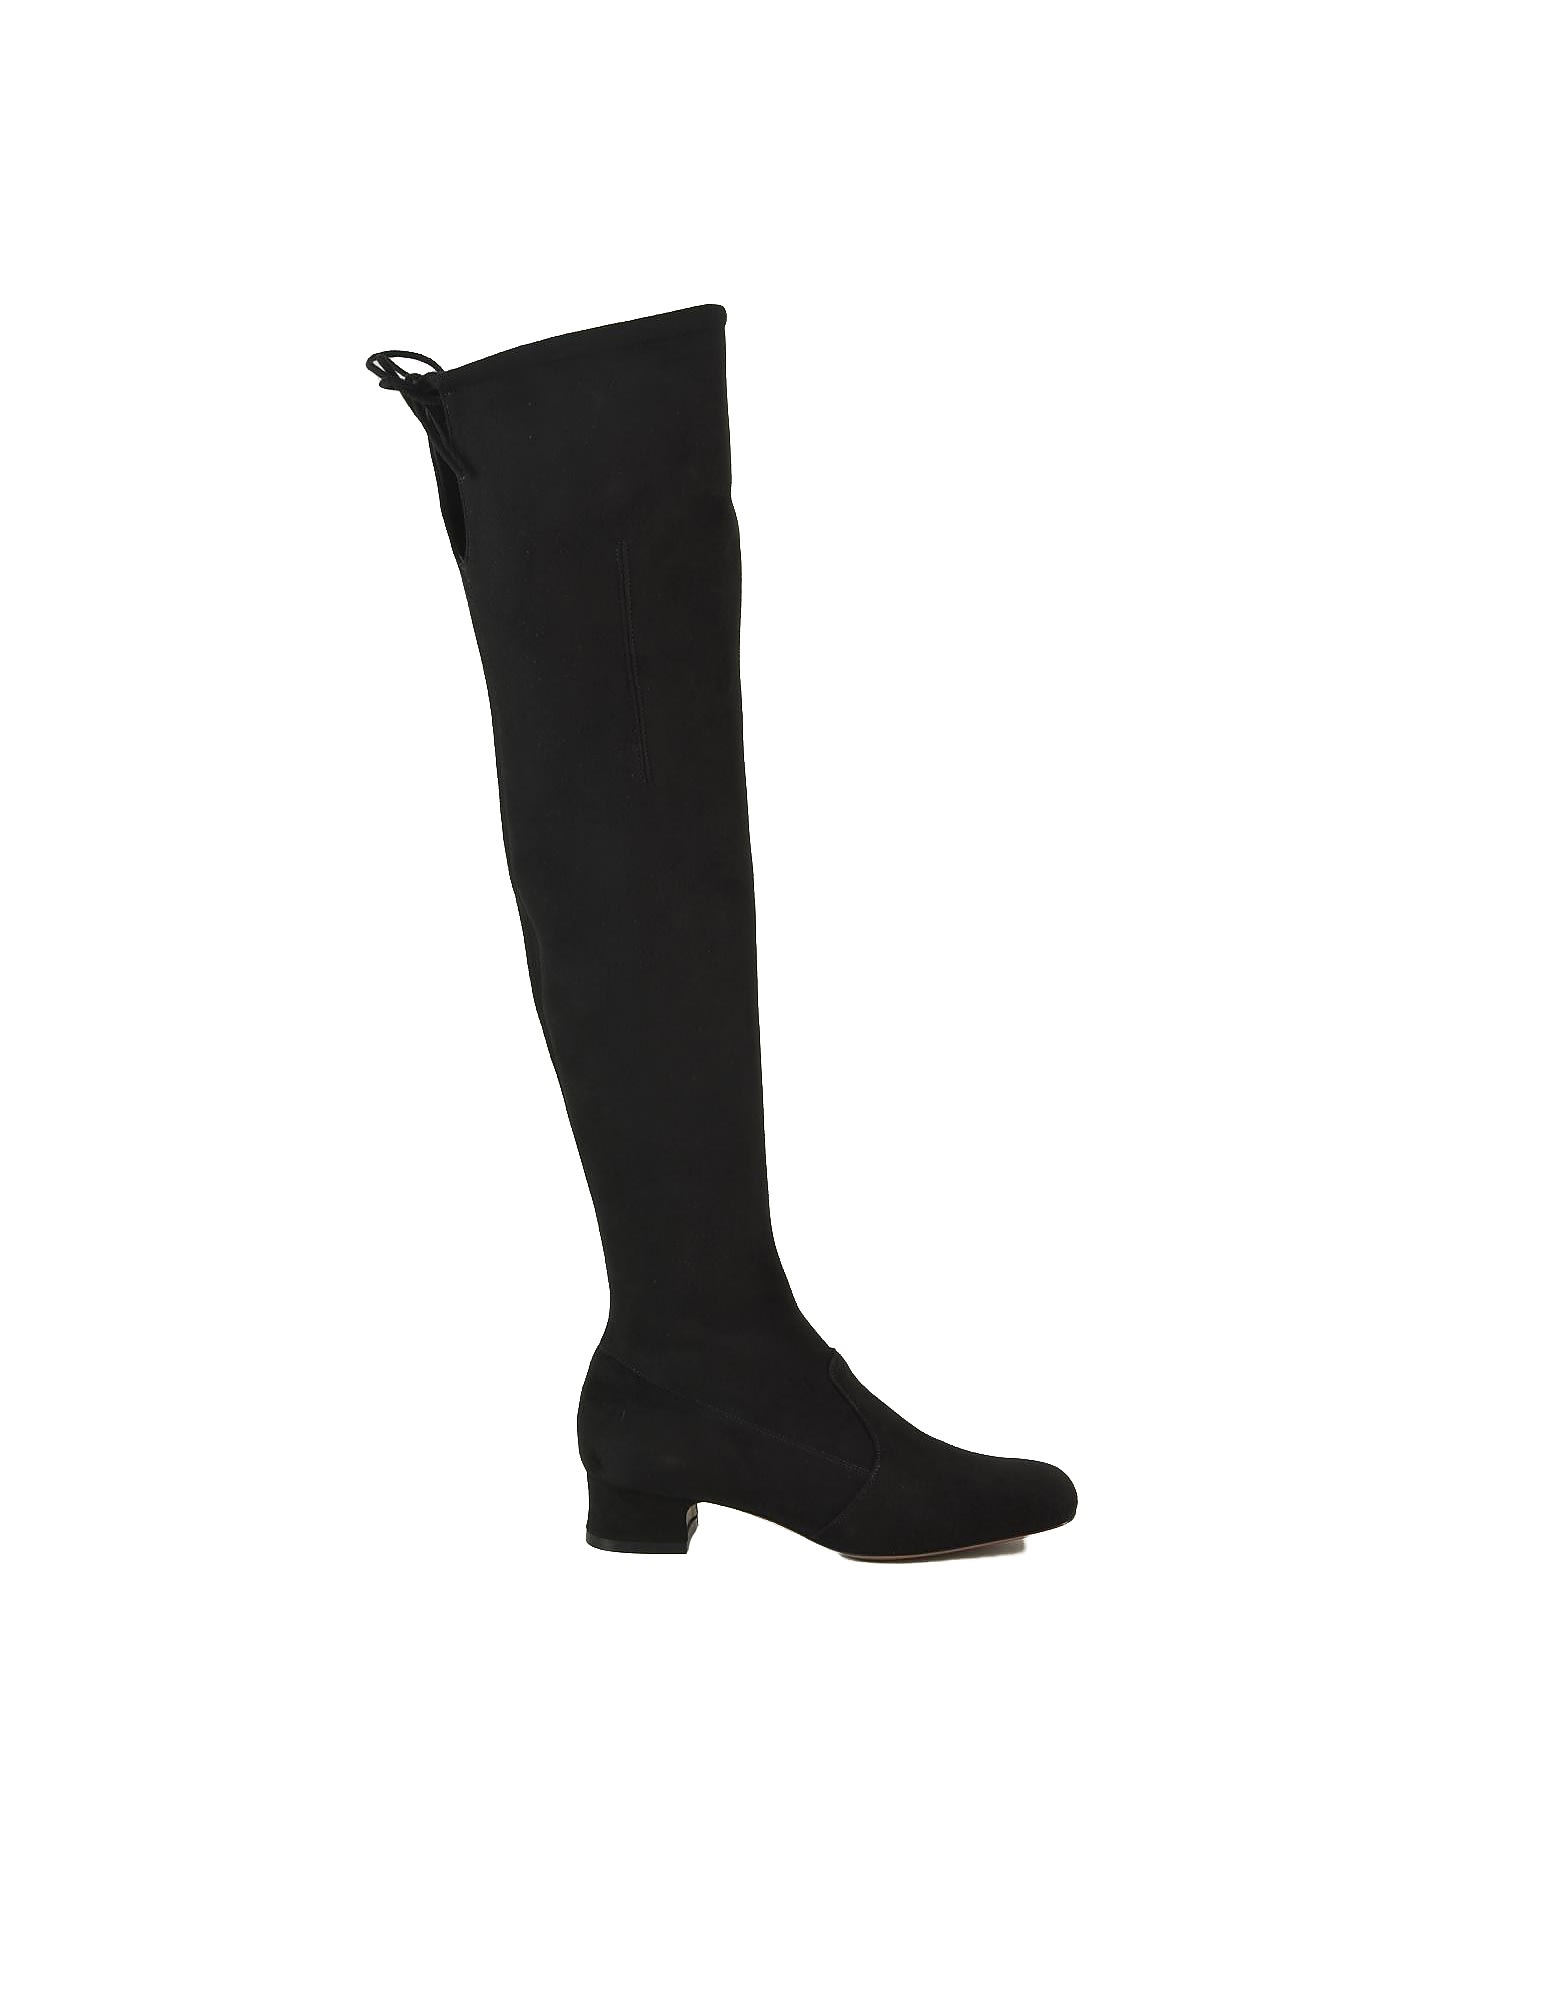 Lautre Chose Black Over-the-knee Flat Boots